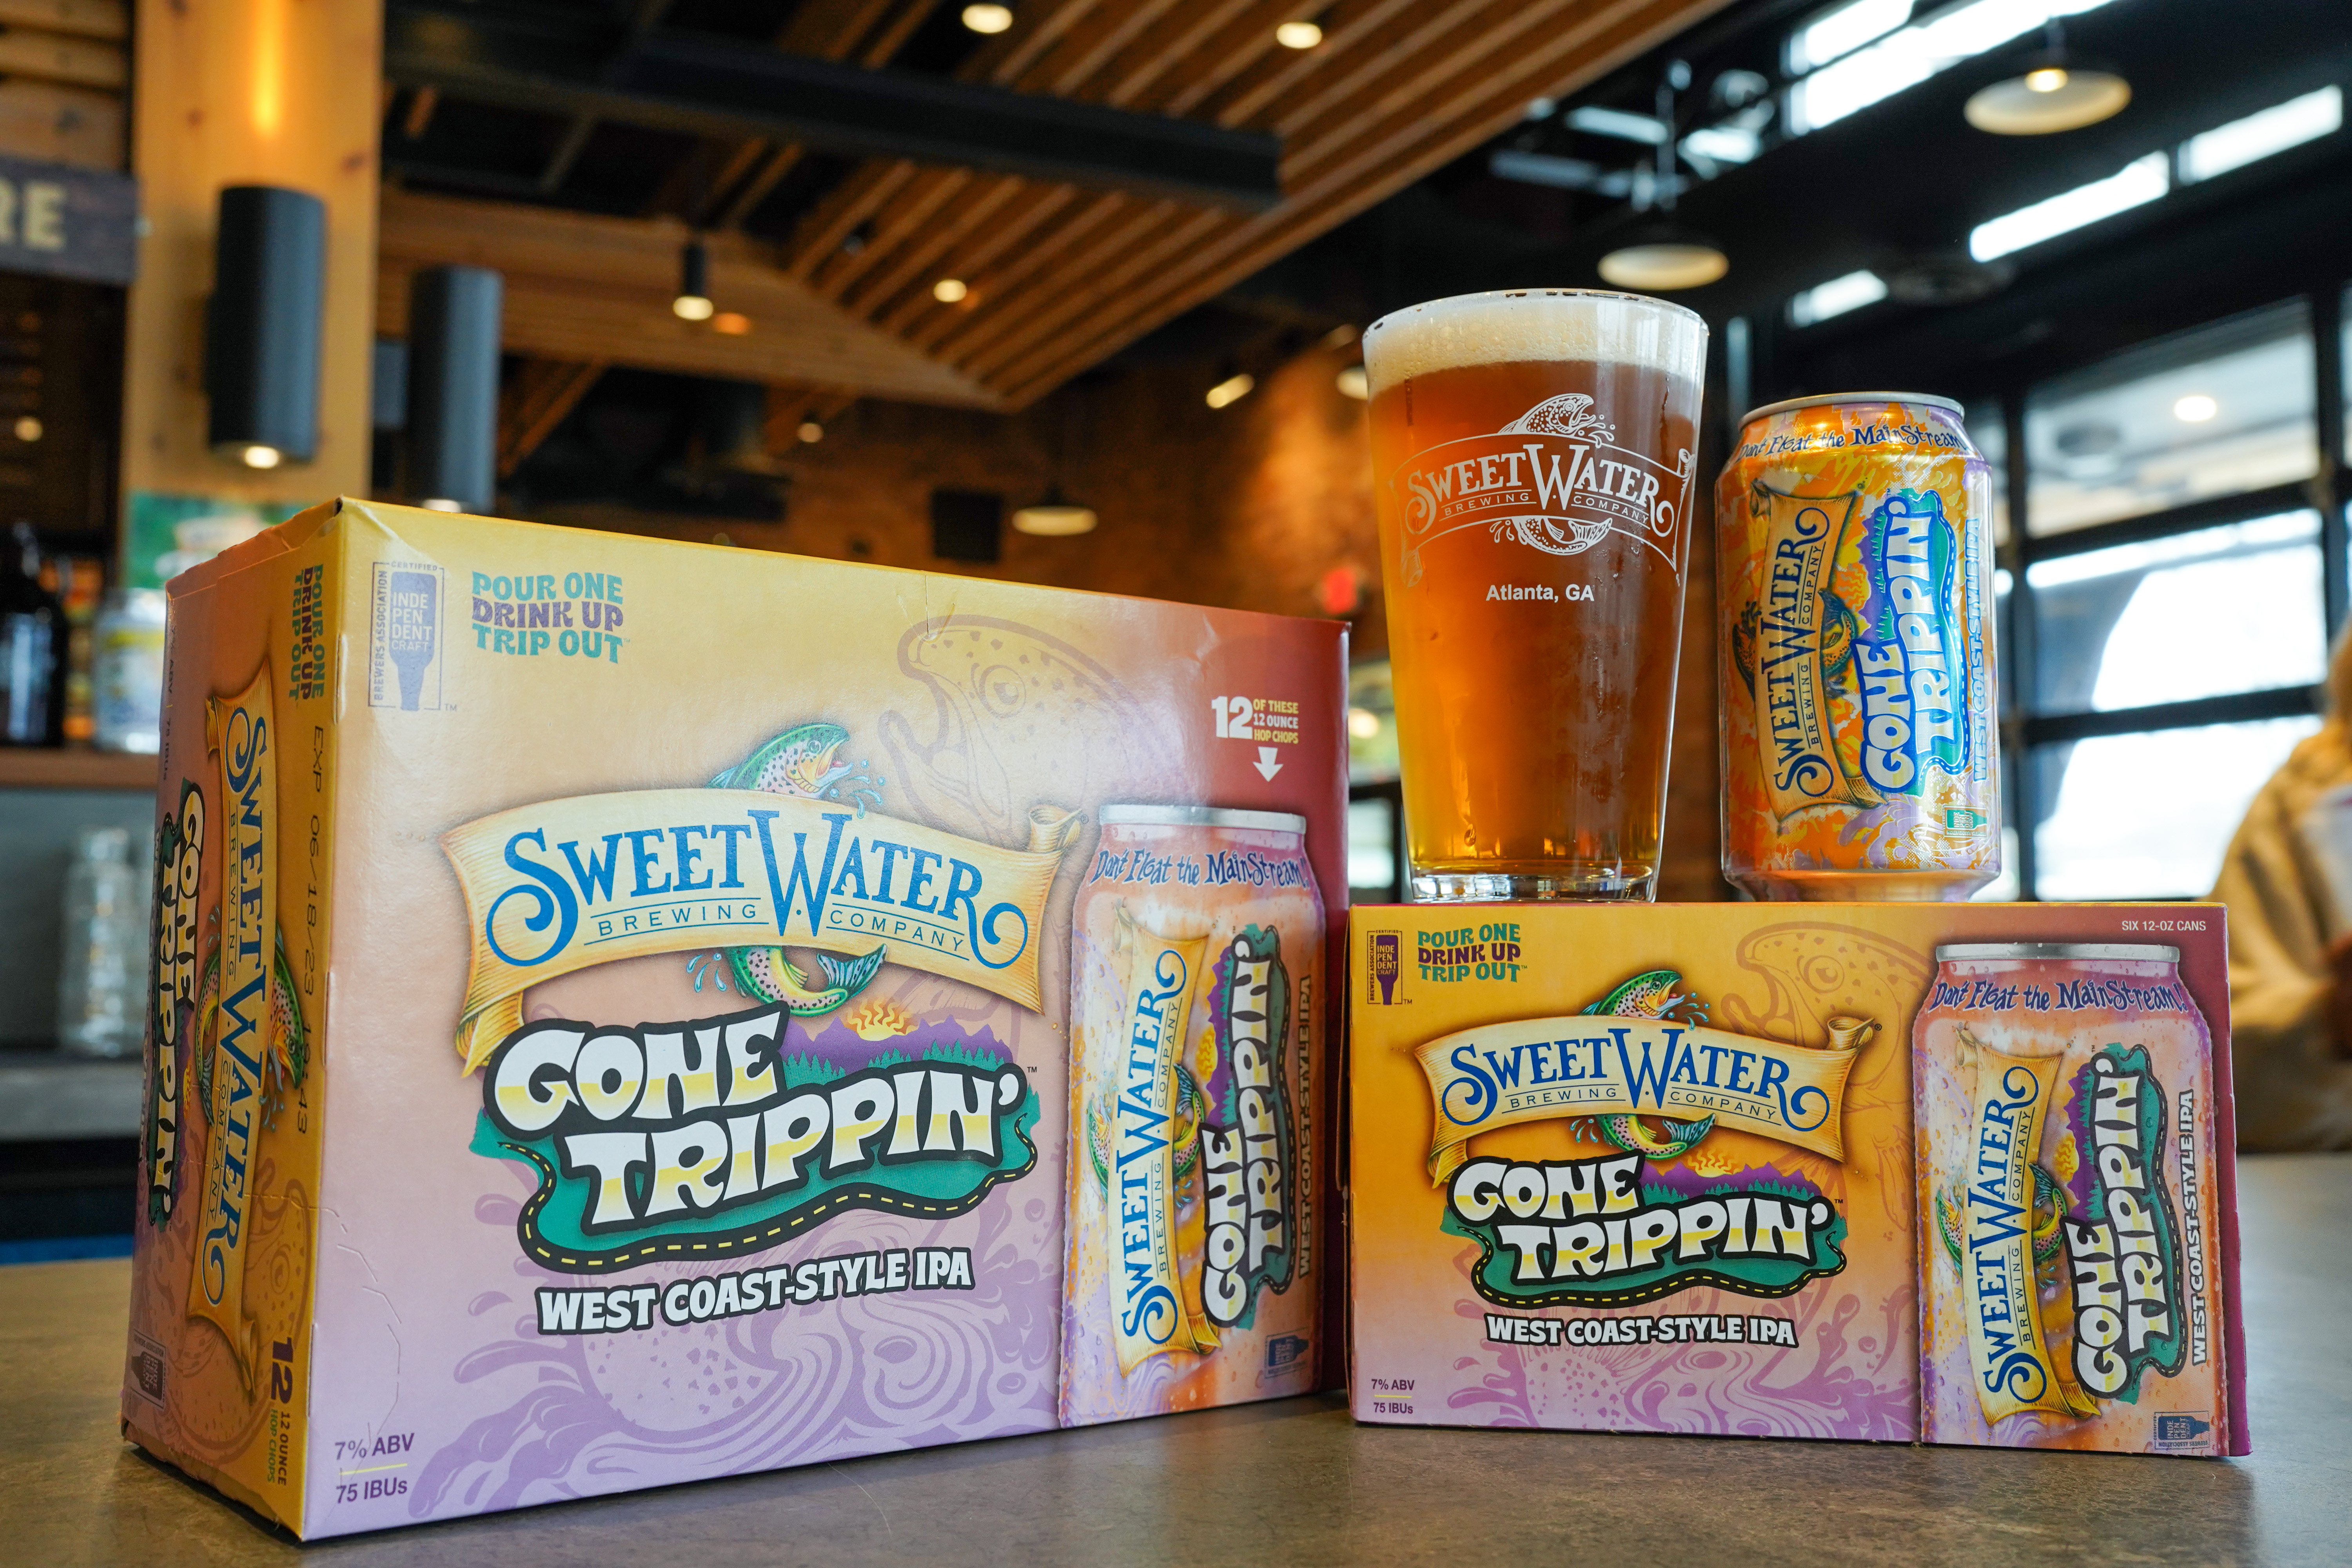 New SweetWater Brewing Company's Newest Addition to its Year-Round Lineup: Gone Trippin'